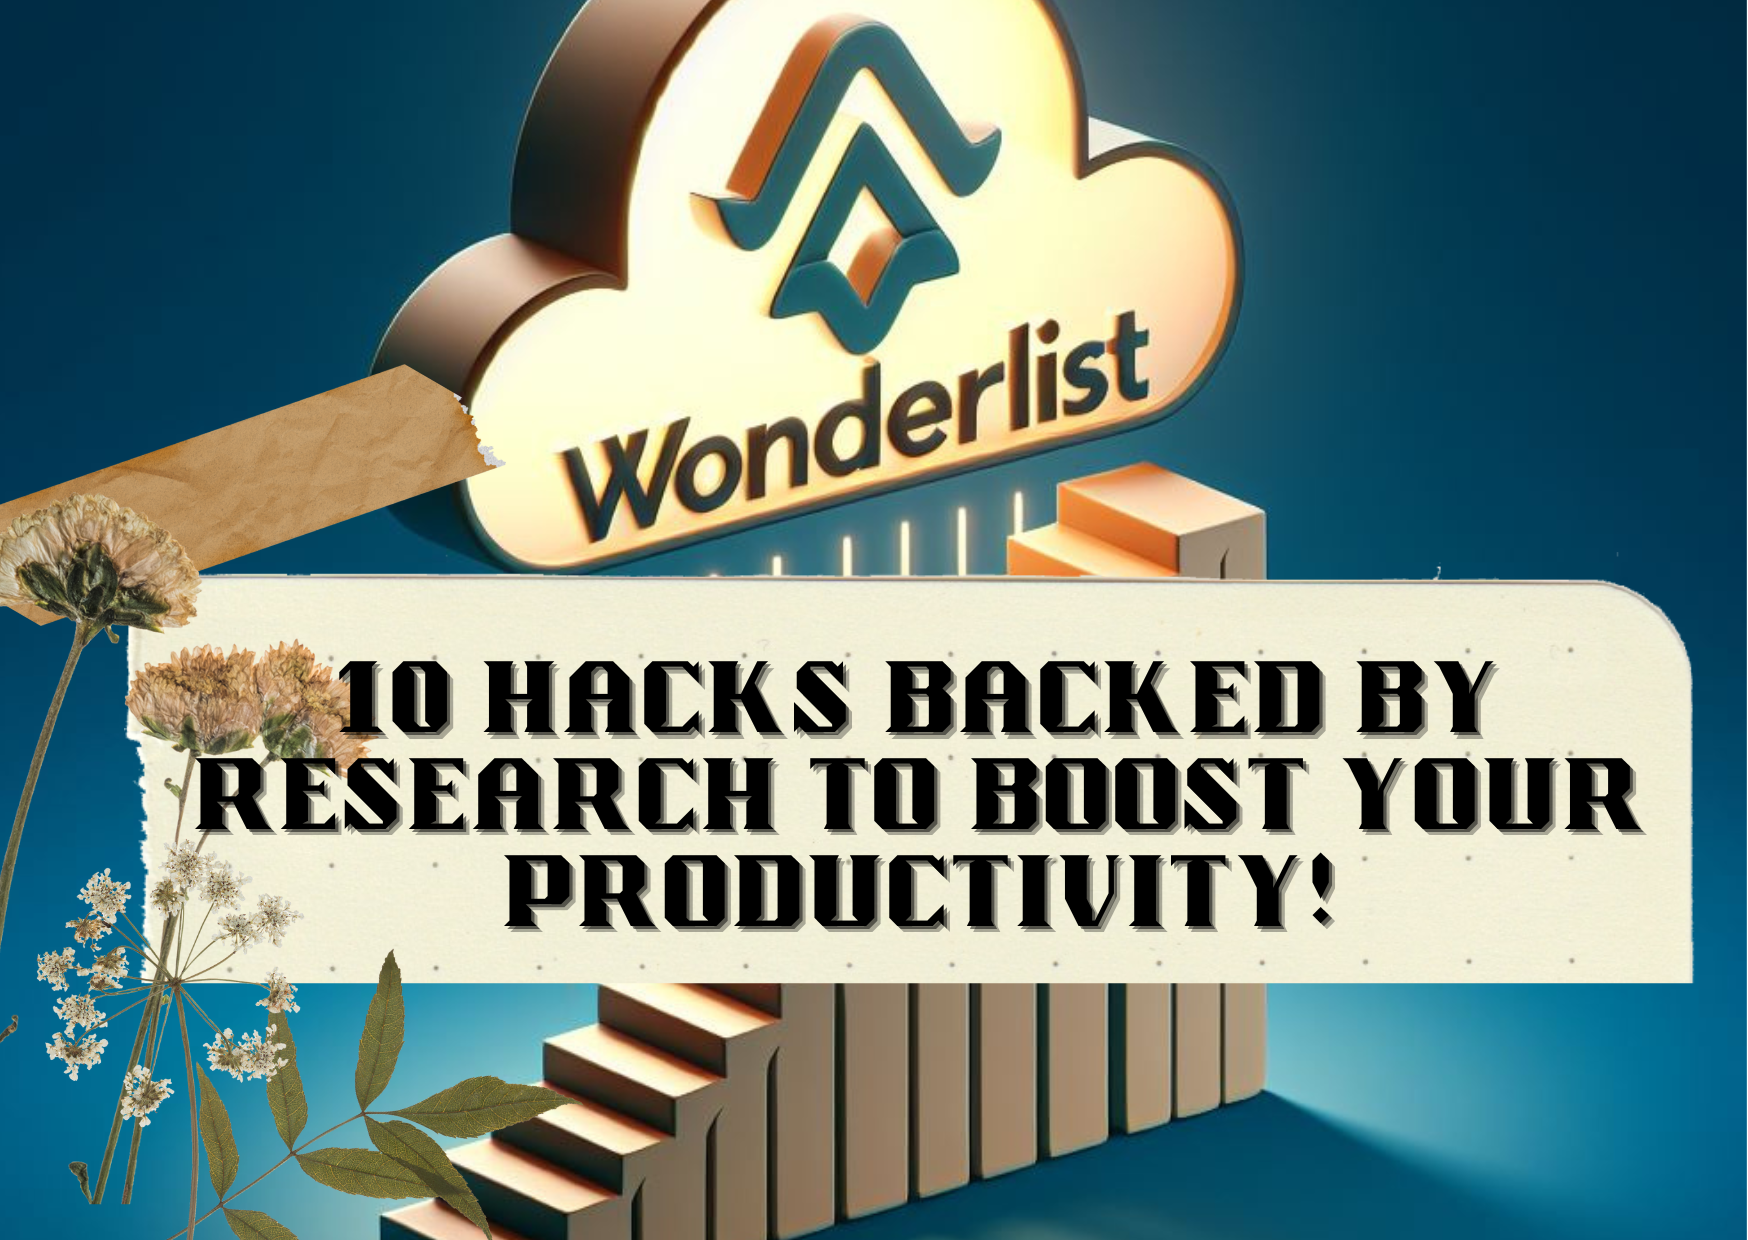 10 Hacks Backed by Research to Boost Your Productivity!